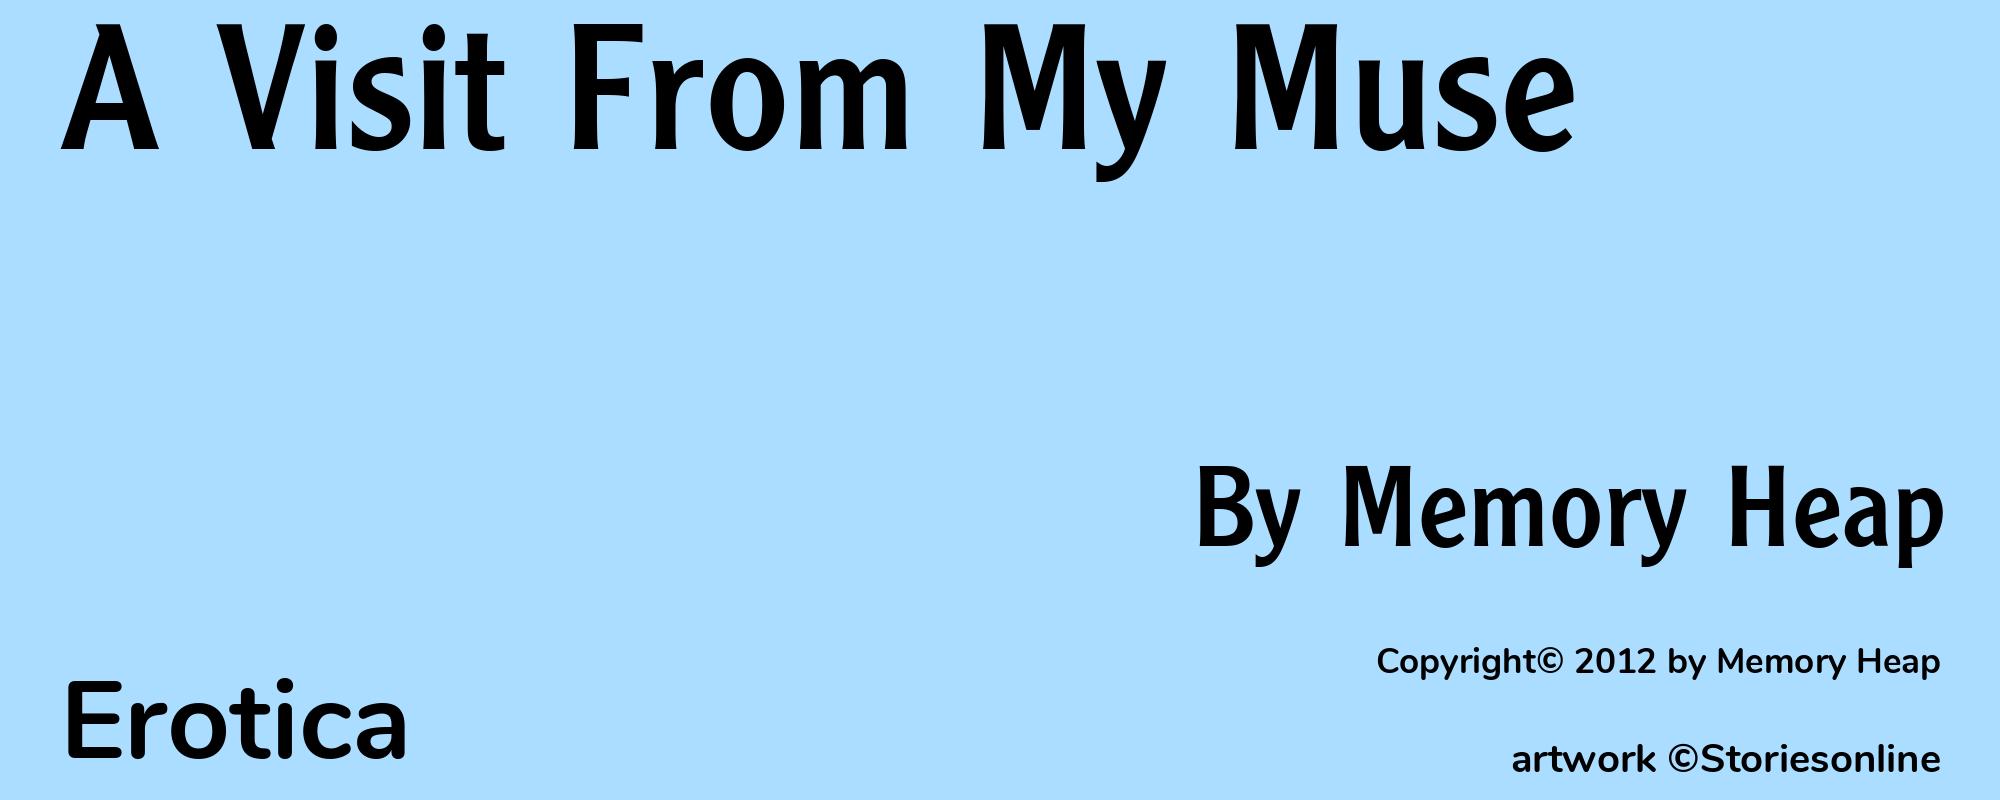 A Visit From My Muse - Cover